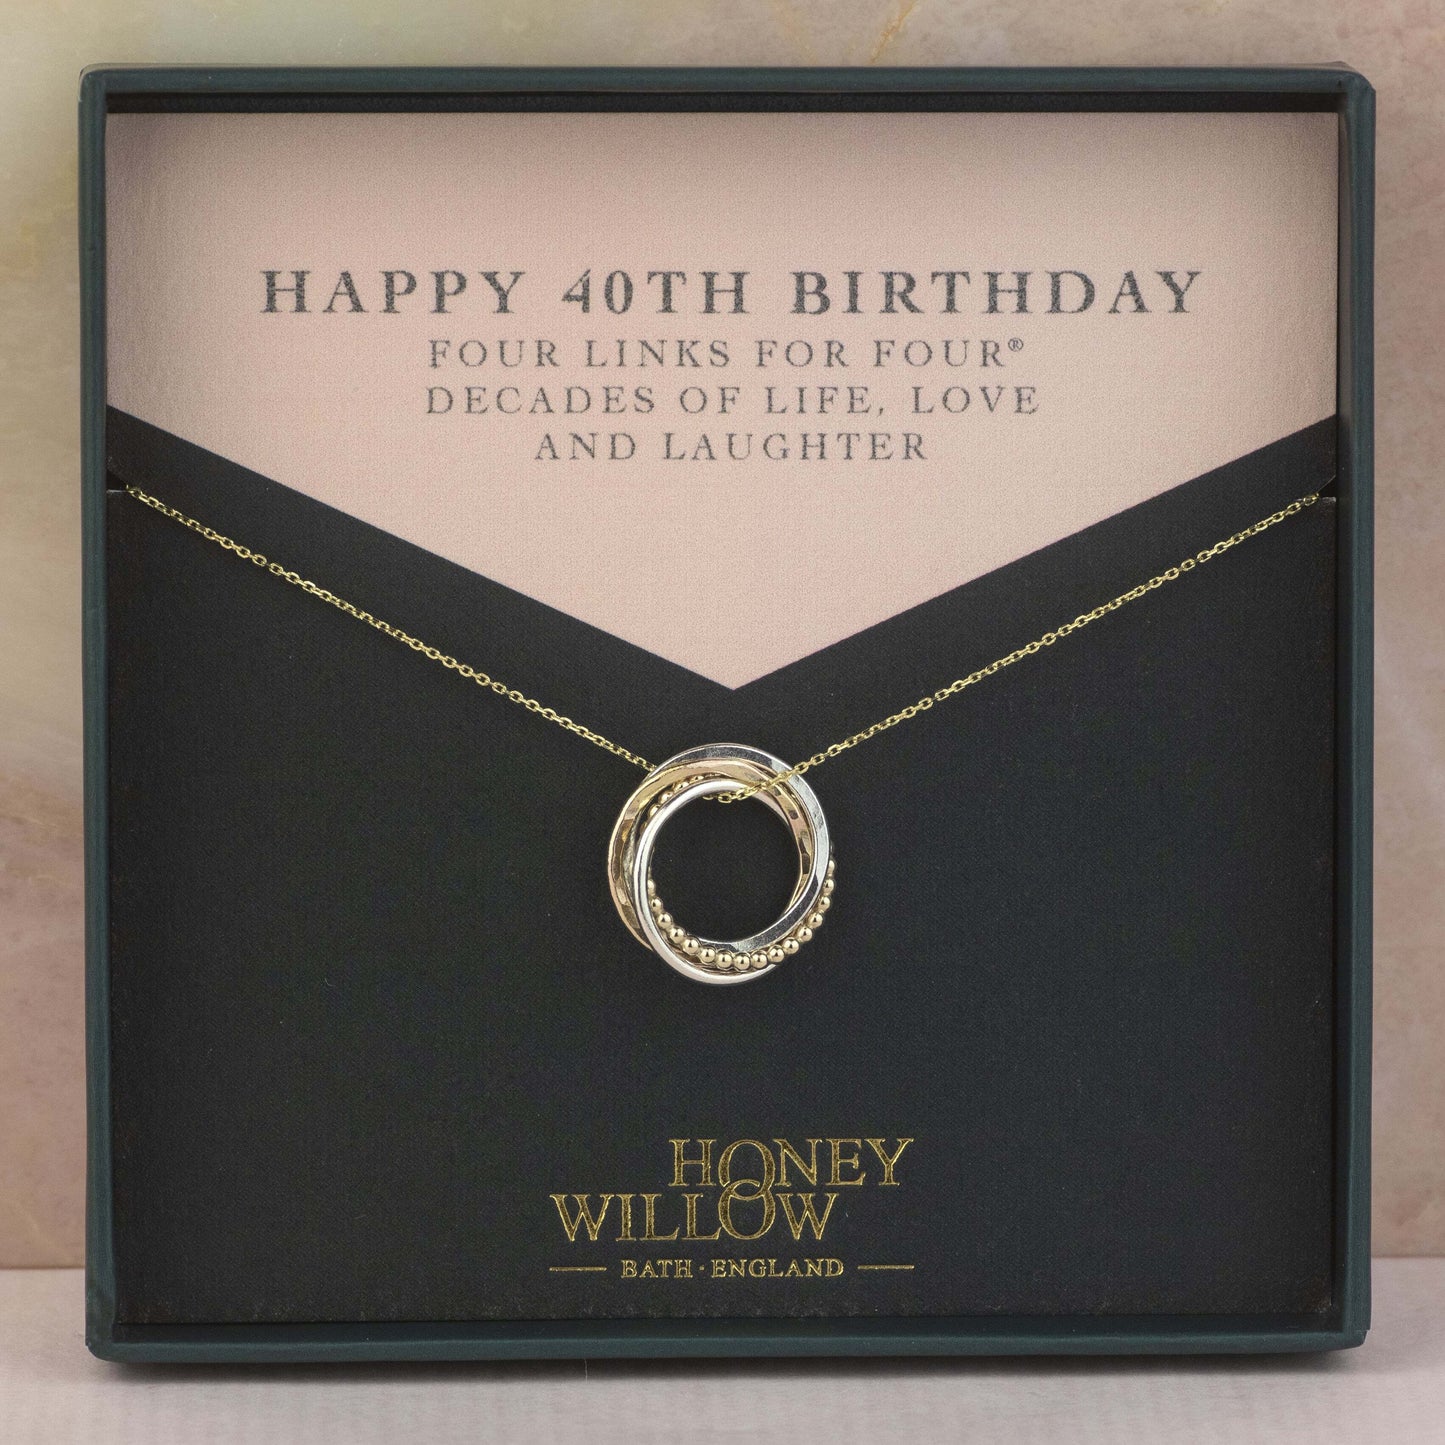 9kt Gold 40th Birthday Necklace - The Original 4 Links for 4 Decades Necklace